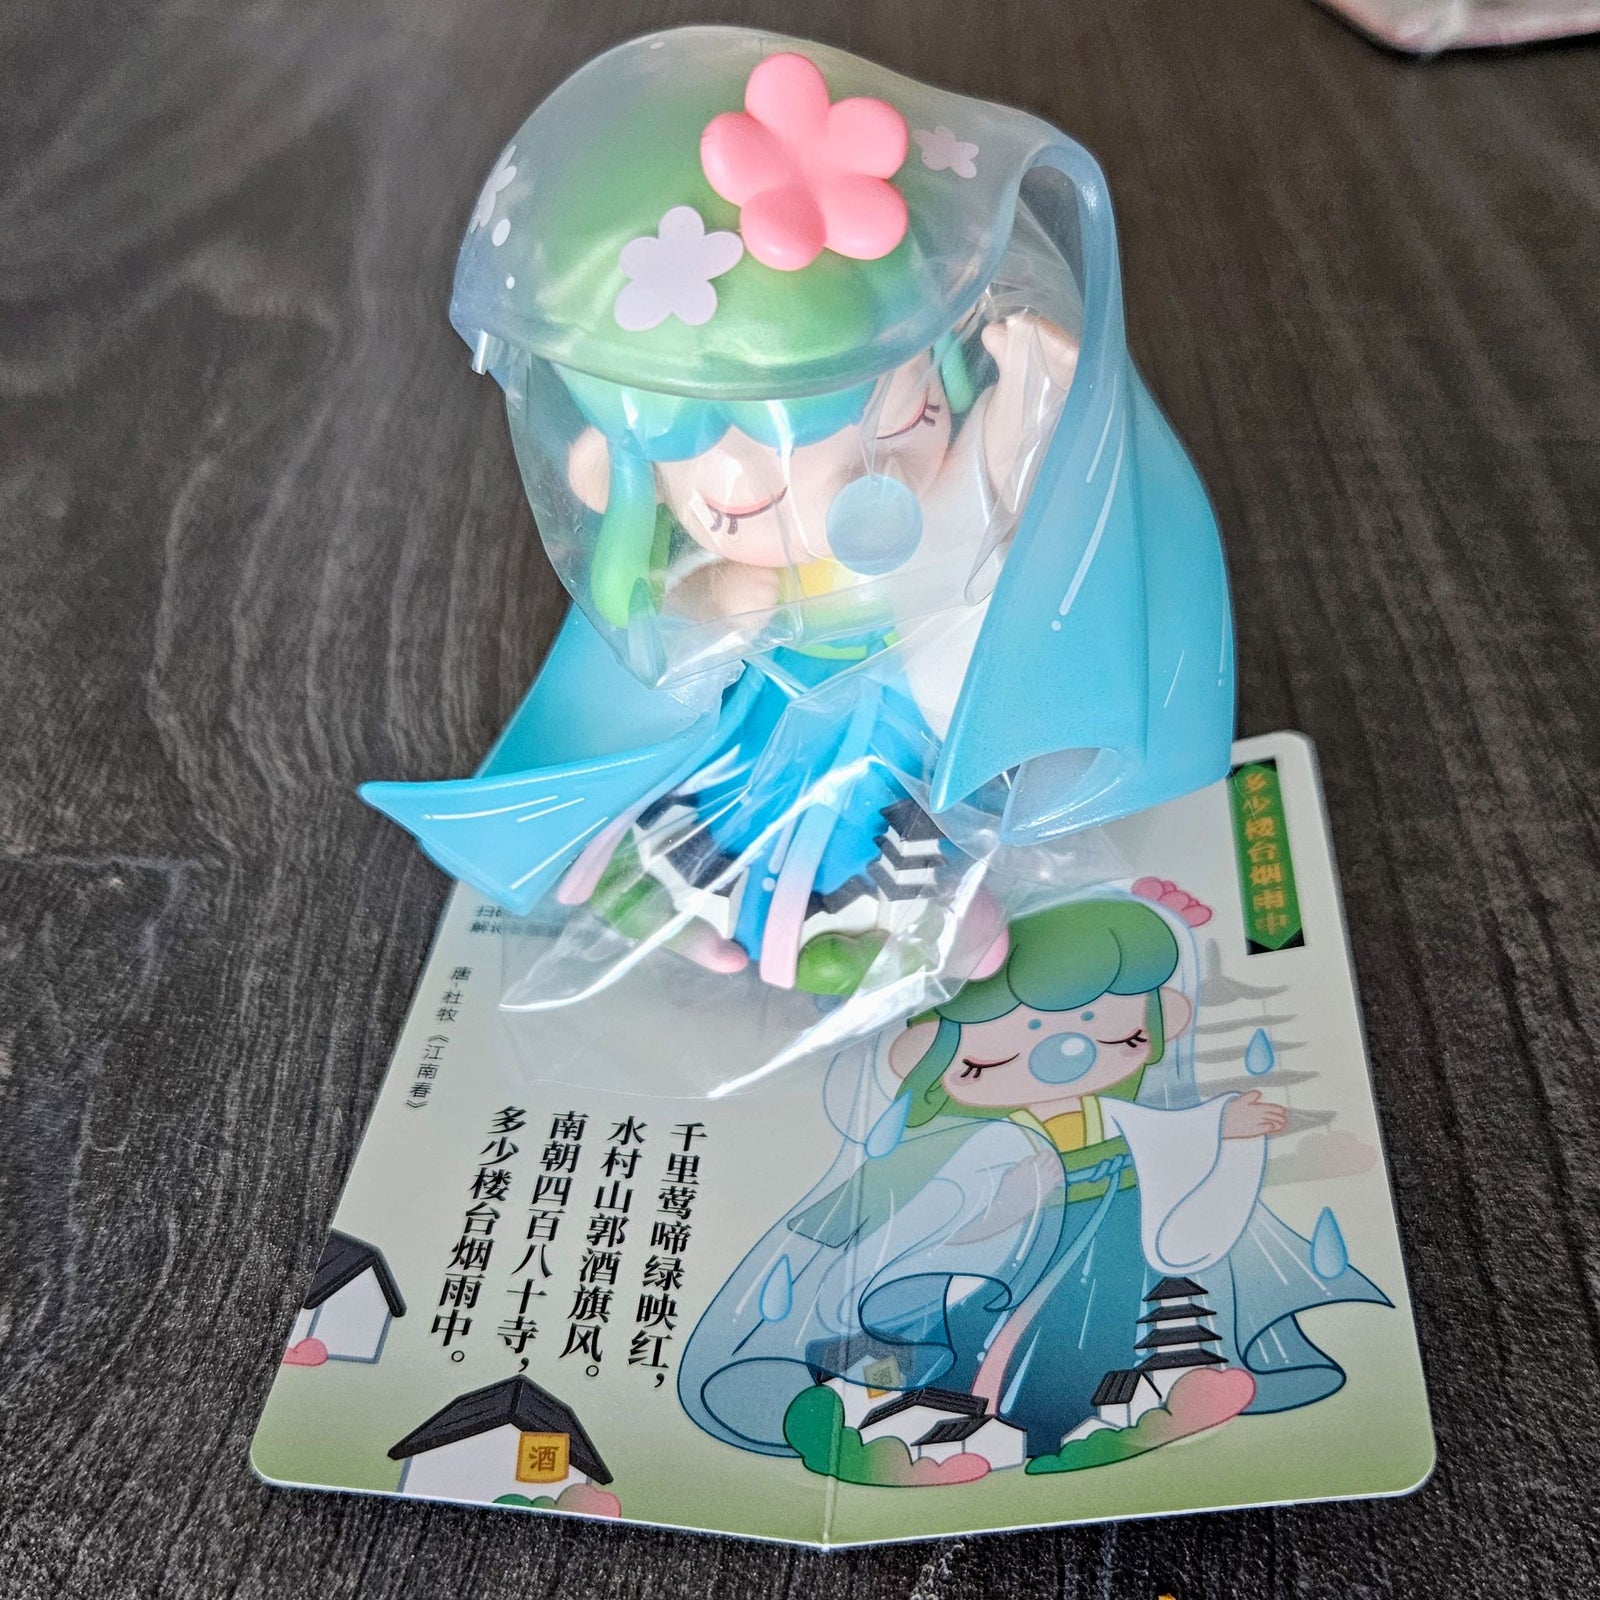 Drizzling Rain - Nanci Poetry Blind Boxes by Rolife - 1